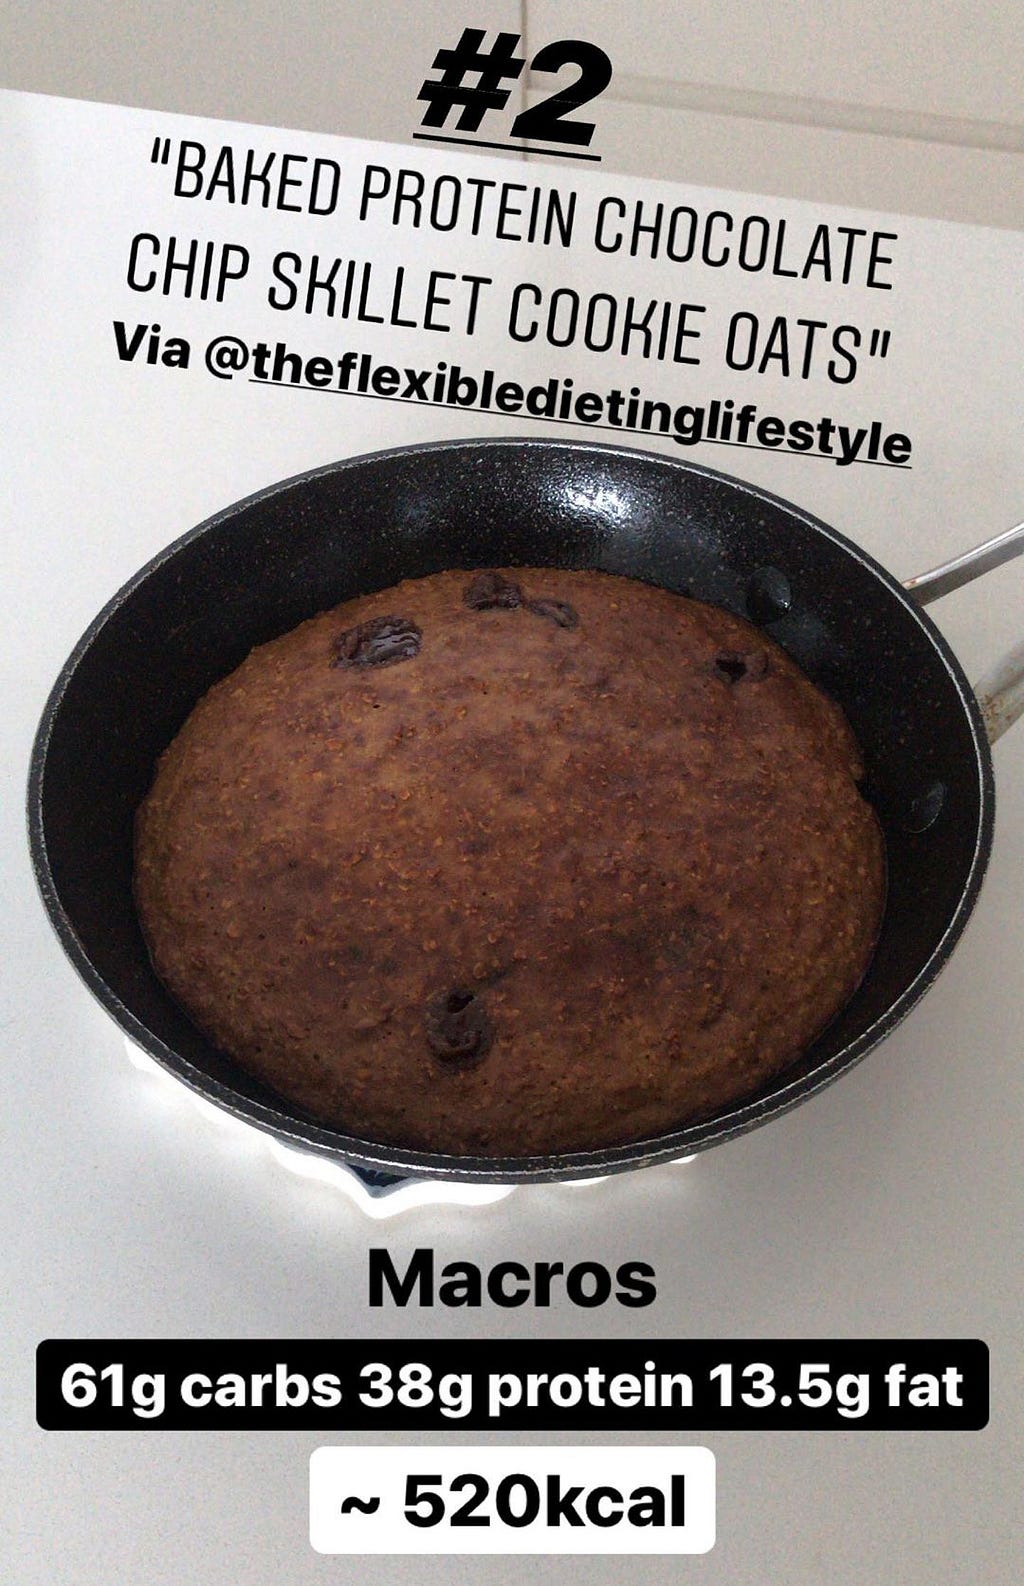 #2 Baked Protein Chocolate Chip Skillet Cookie Oats